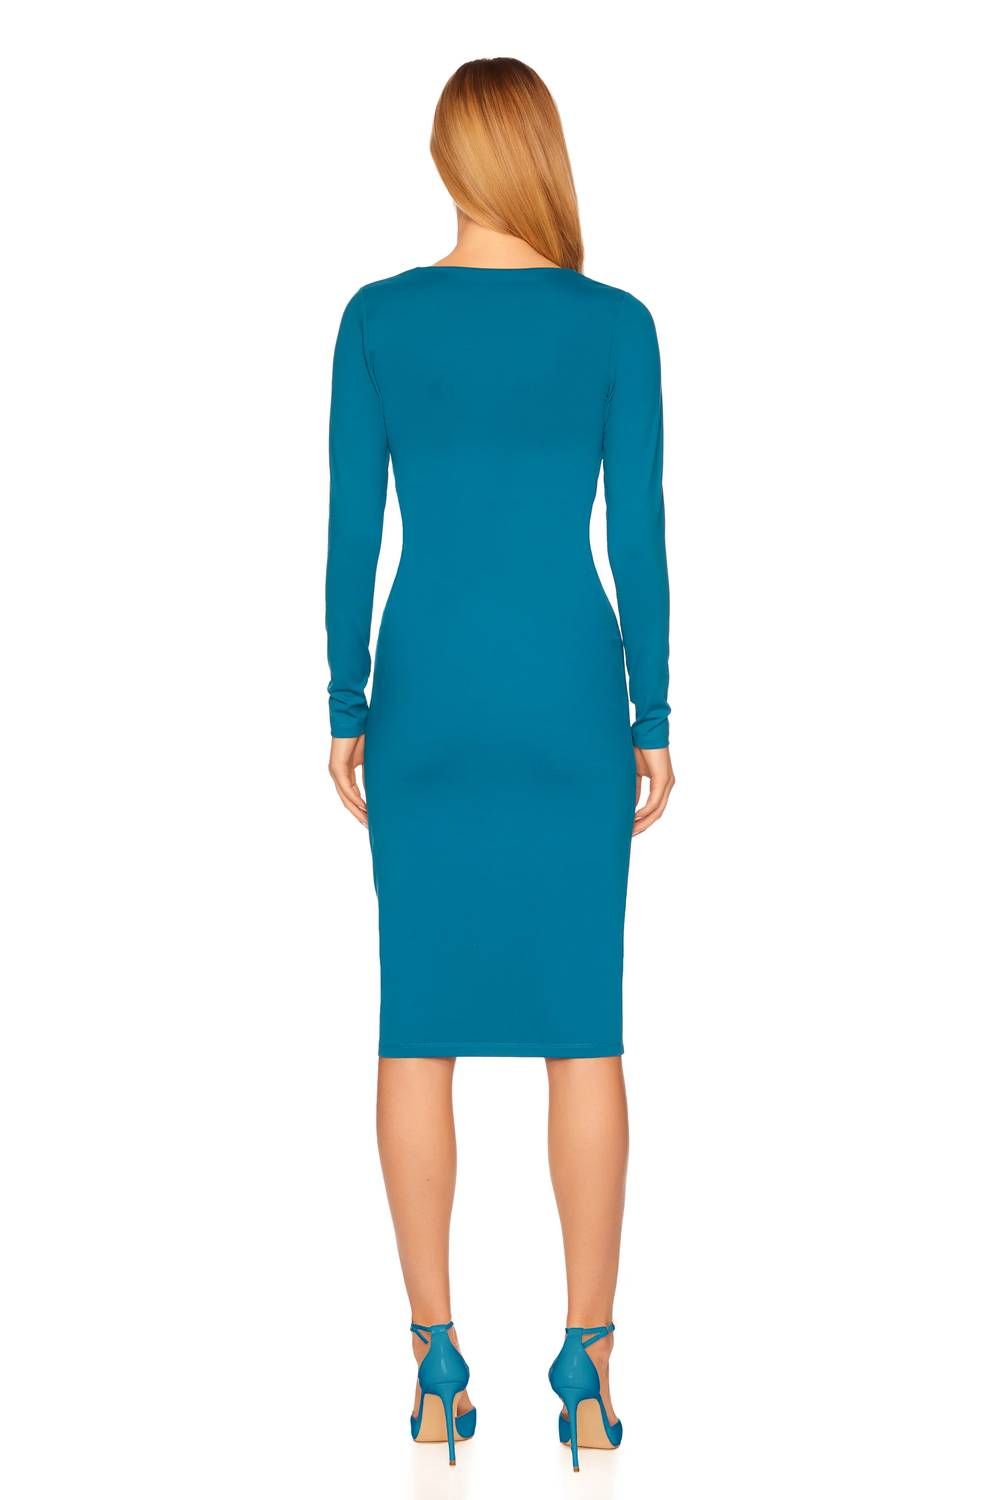 Style 1-3196131808-2696 Susana Monaco Size L Long Sleeve Blue Cocktail Dress on Queenly